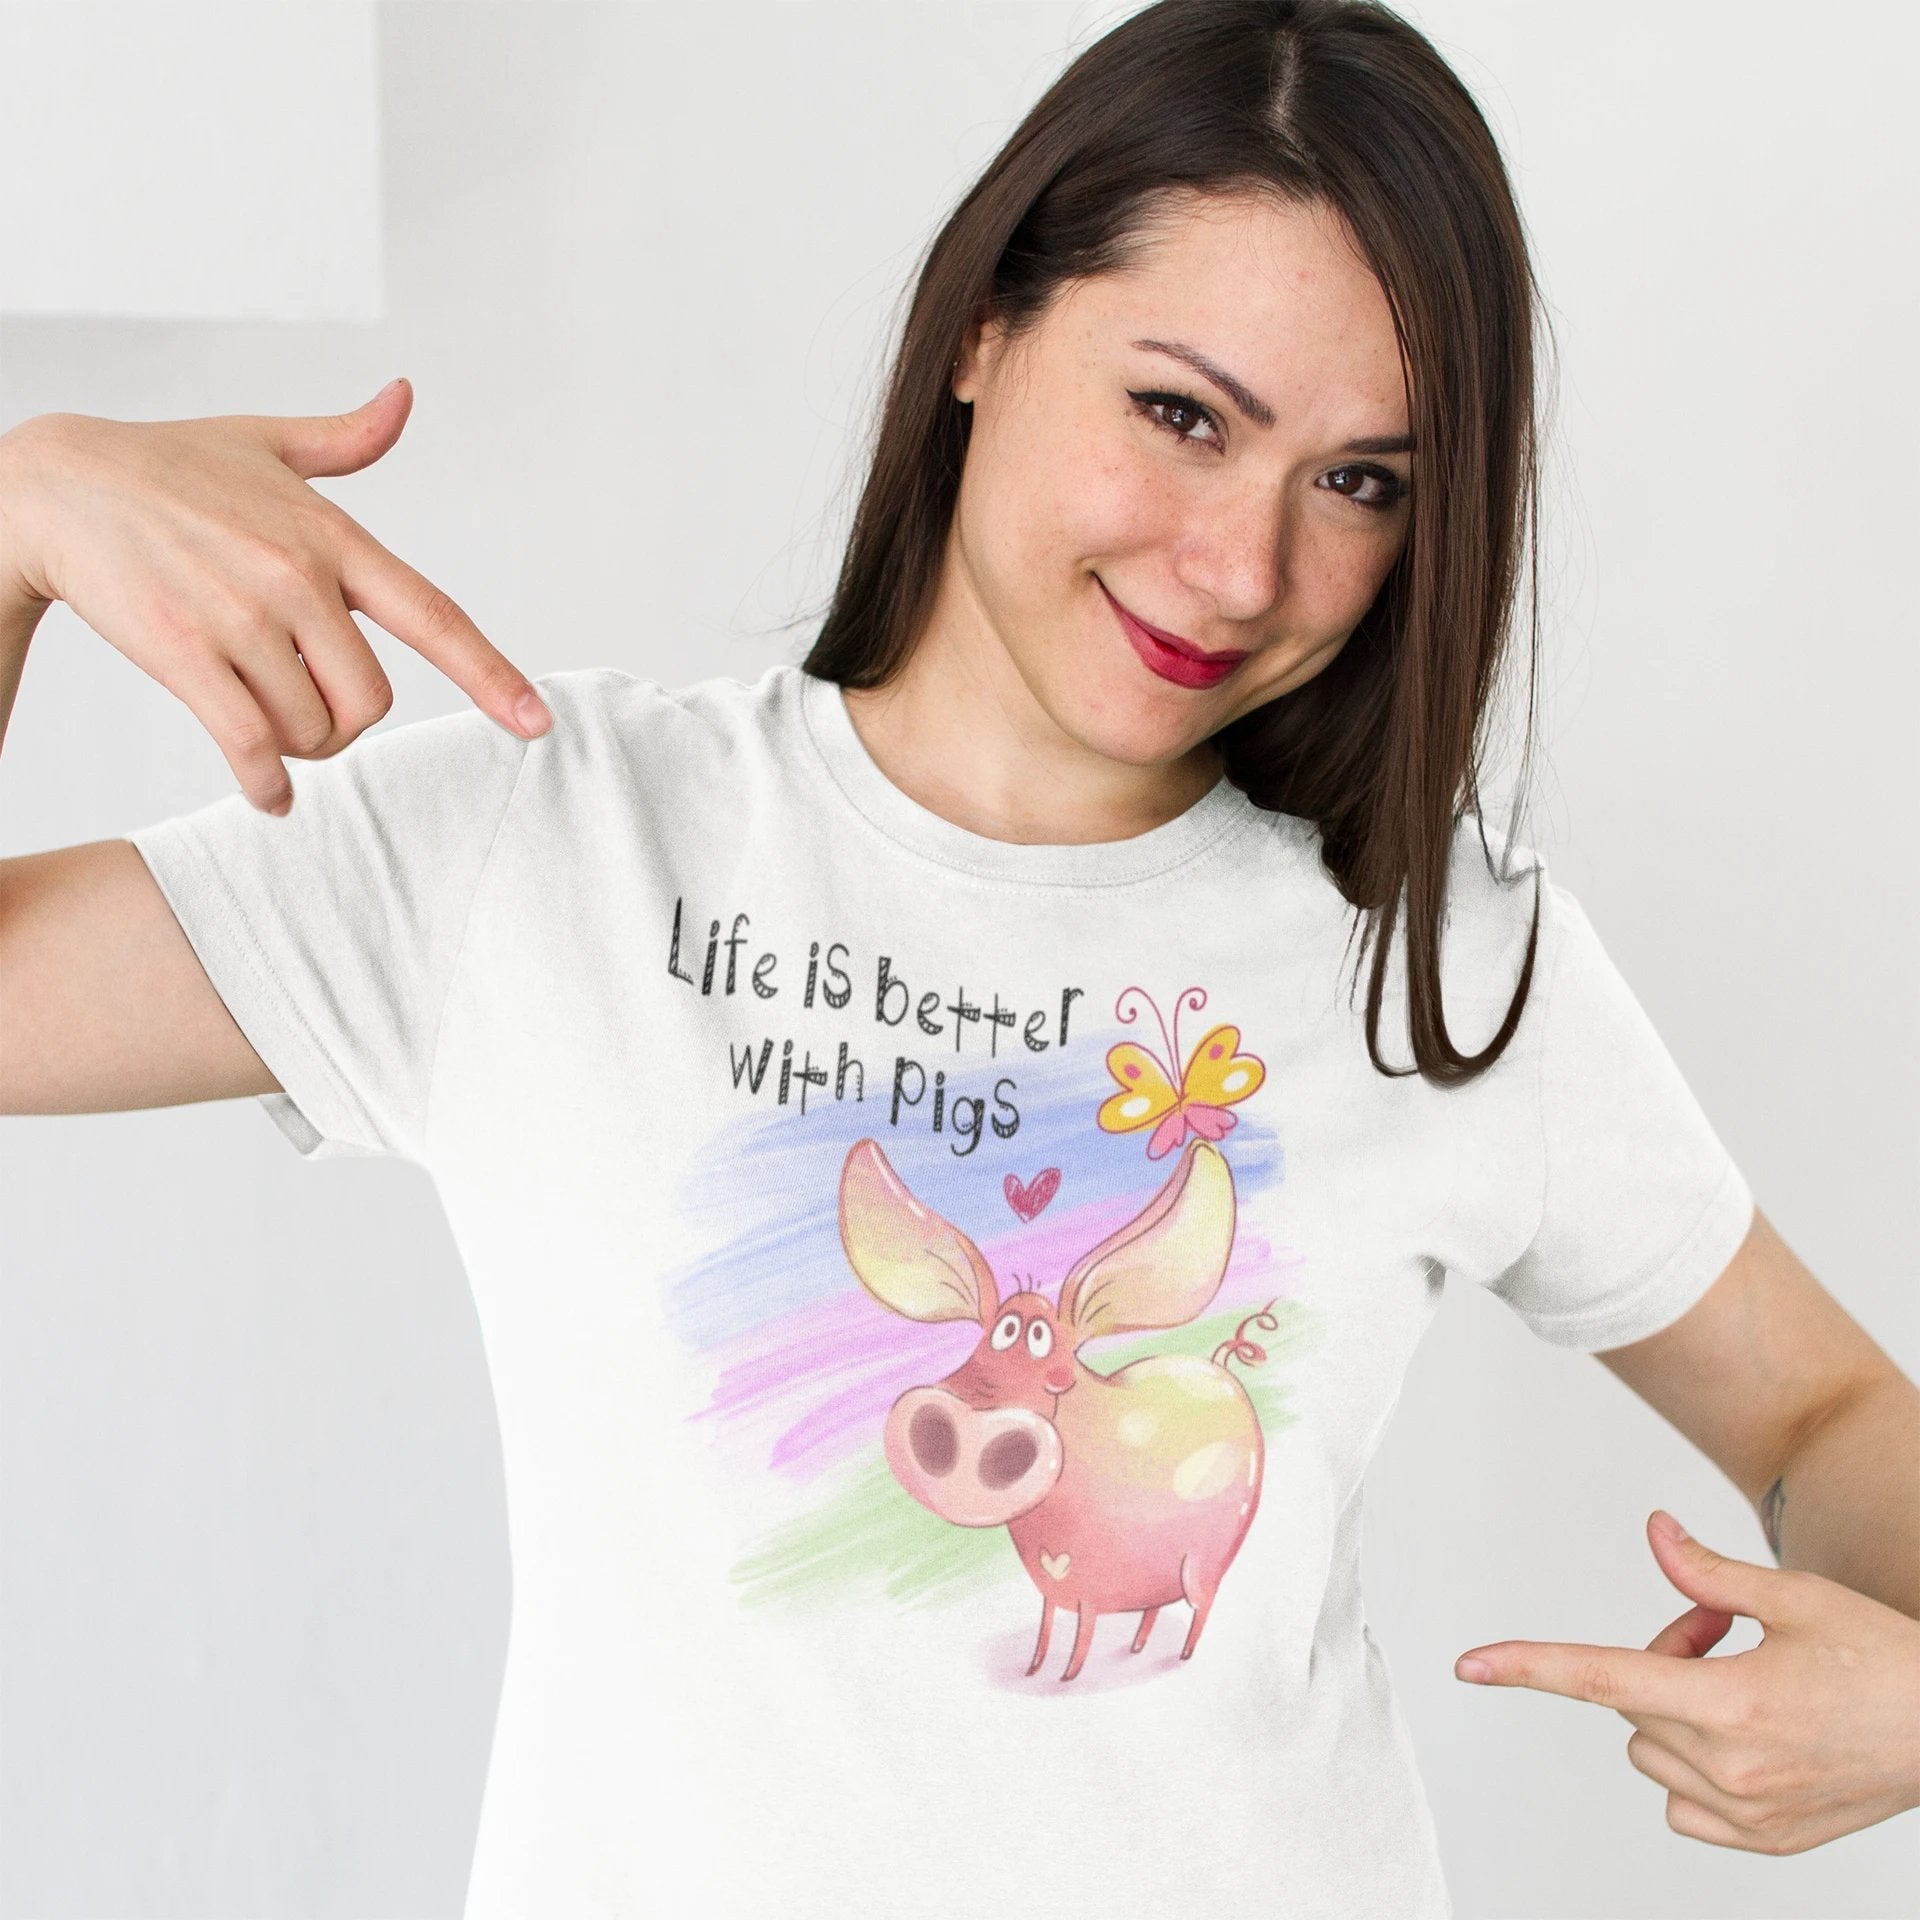 Swine Symphony: 'Life is Better with Pigs' T-shirt – Where Oinks Meet Optimal Living!